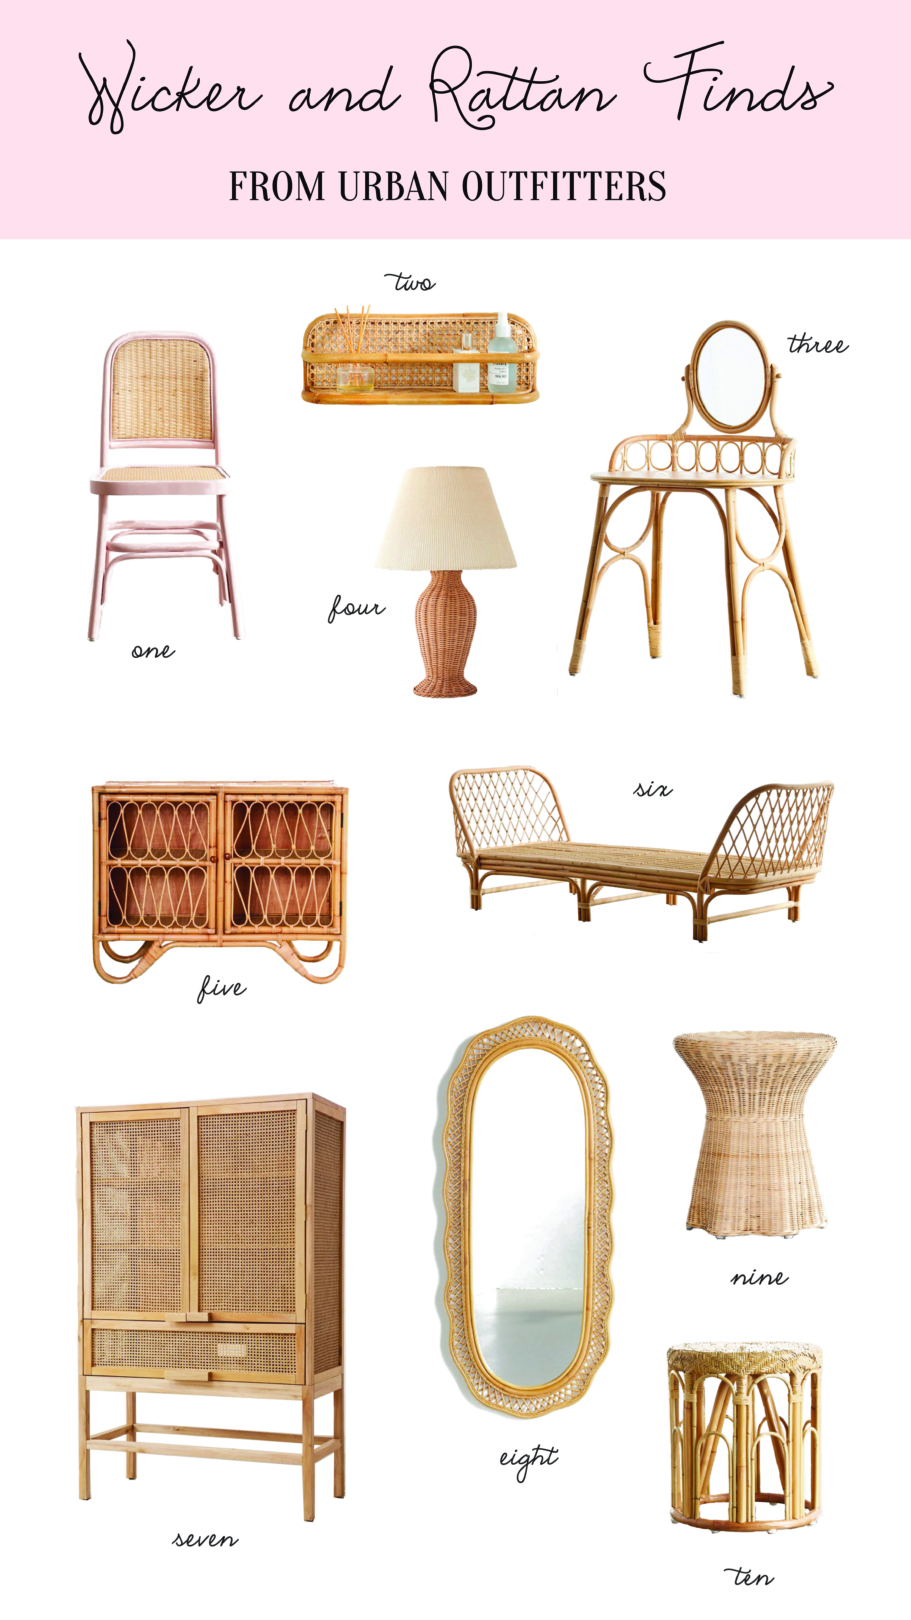 wicker and rattan furniture pics by Palm Beach Lately 